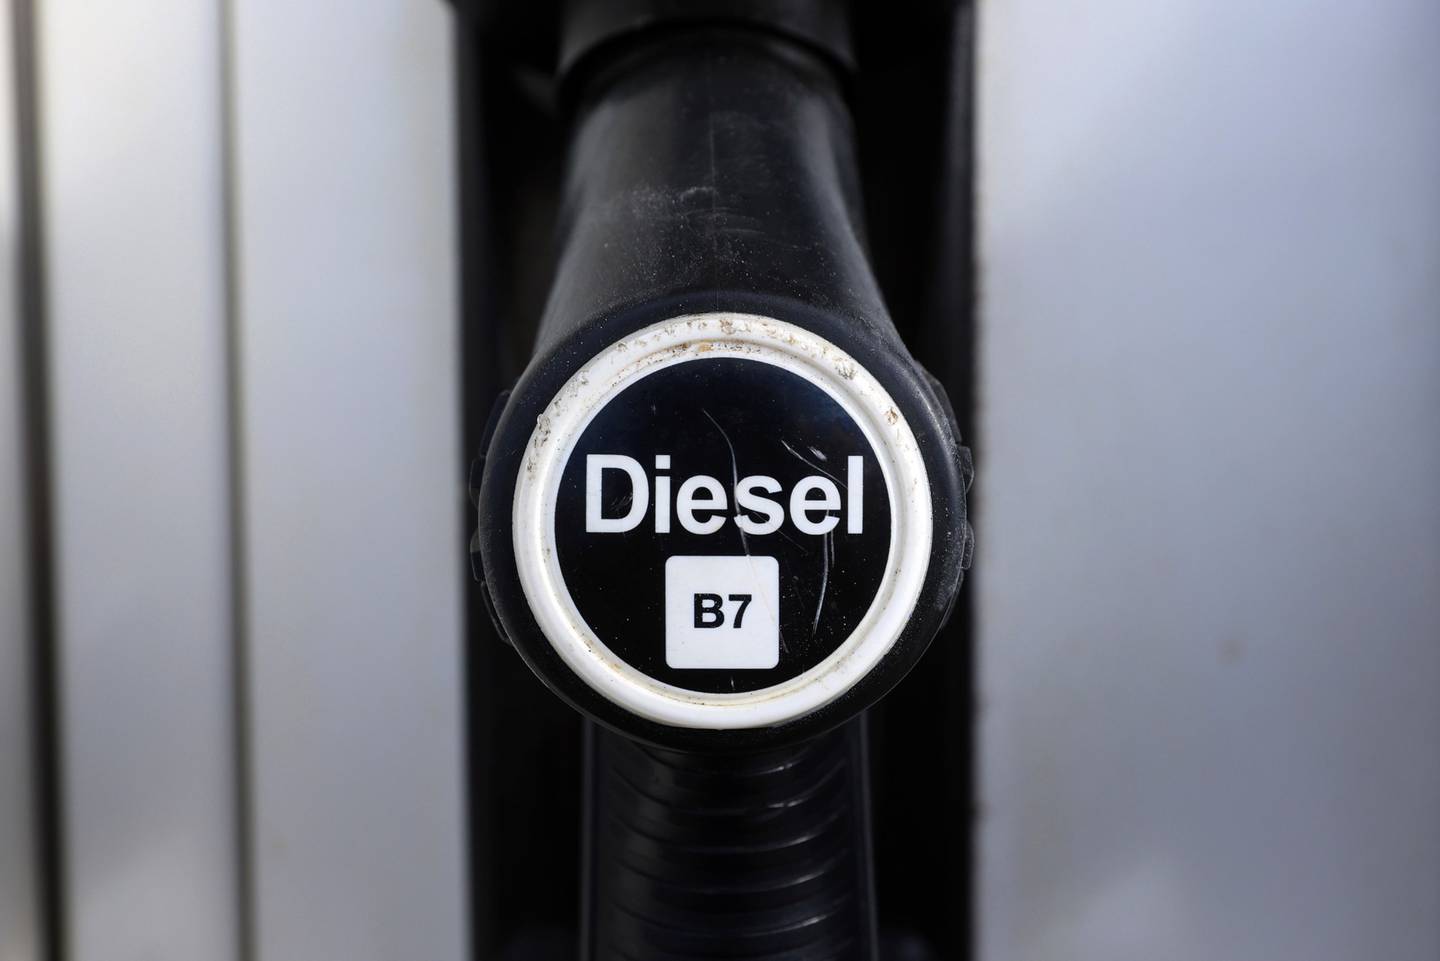 The nozzle of a diesel pump in the gas station at the Hans Engelke Energie OHG depot in Berlin, Germany, on Wednesday, Oct. 5, 2022. For many Europeans, the key concern during the current energy crisis is doing whatever it takes to stay warm in the coming months. Photographer: Krisztian Bocsi/Bloomberg